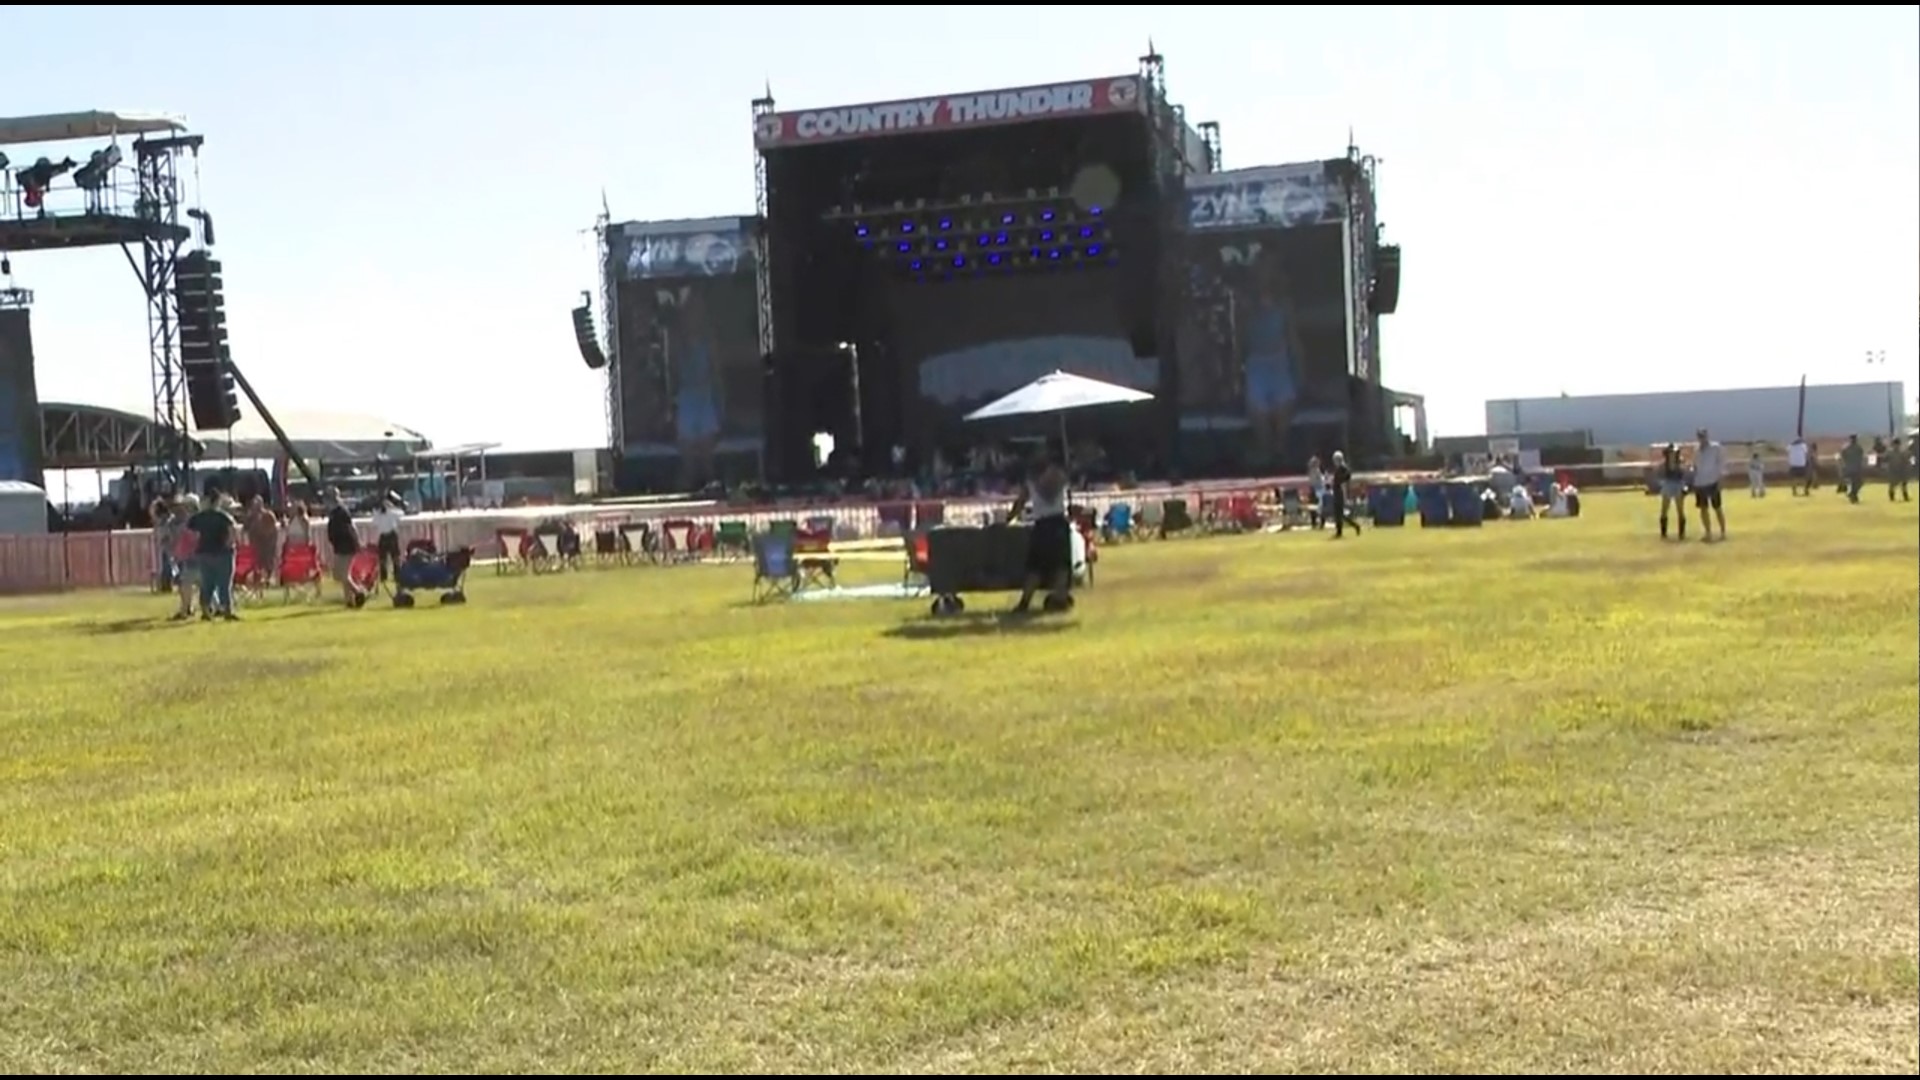 We spoke to Halle Kearns about her Country Thunder performance. The 4-day festival is expected to bring a large crowd.